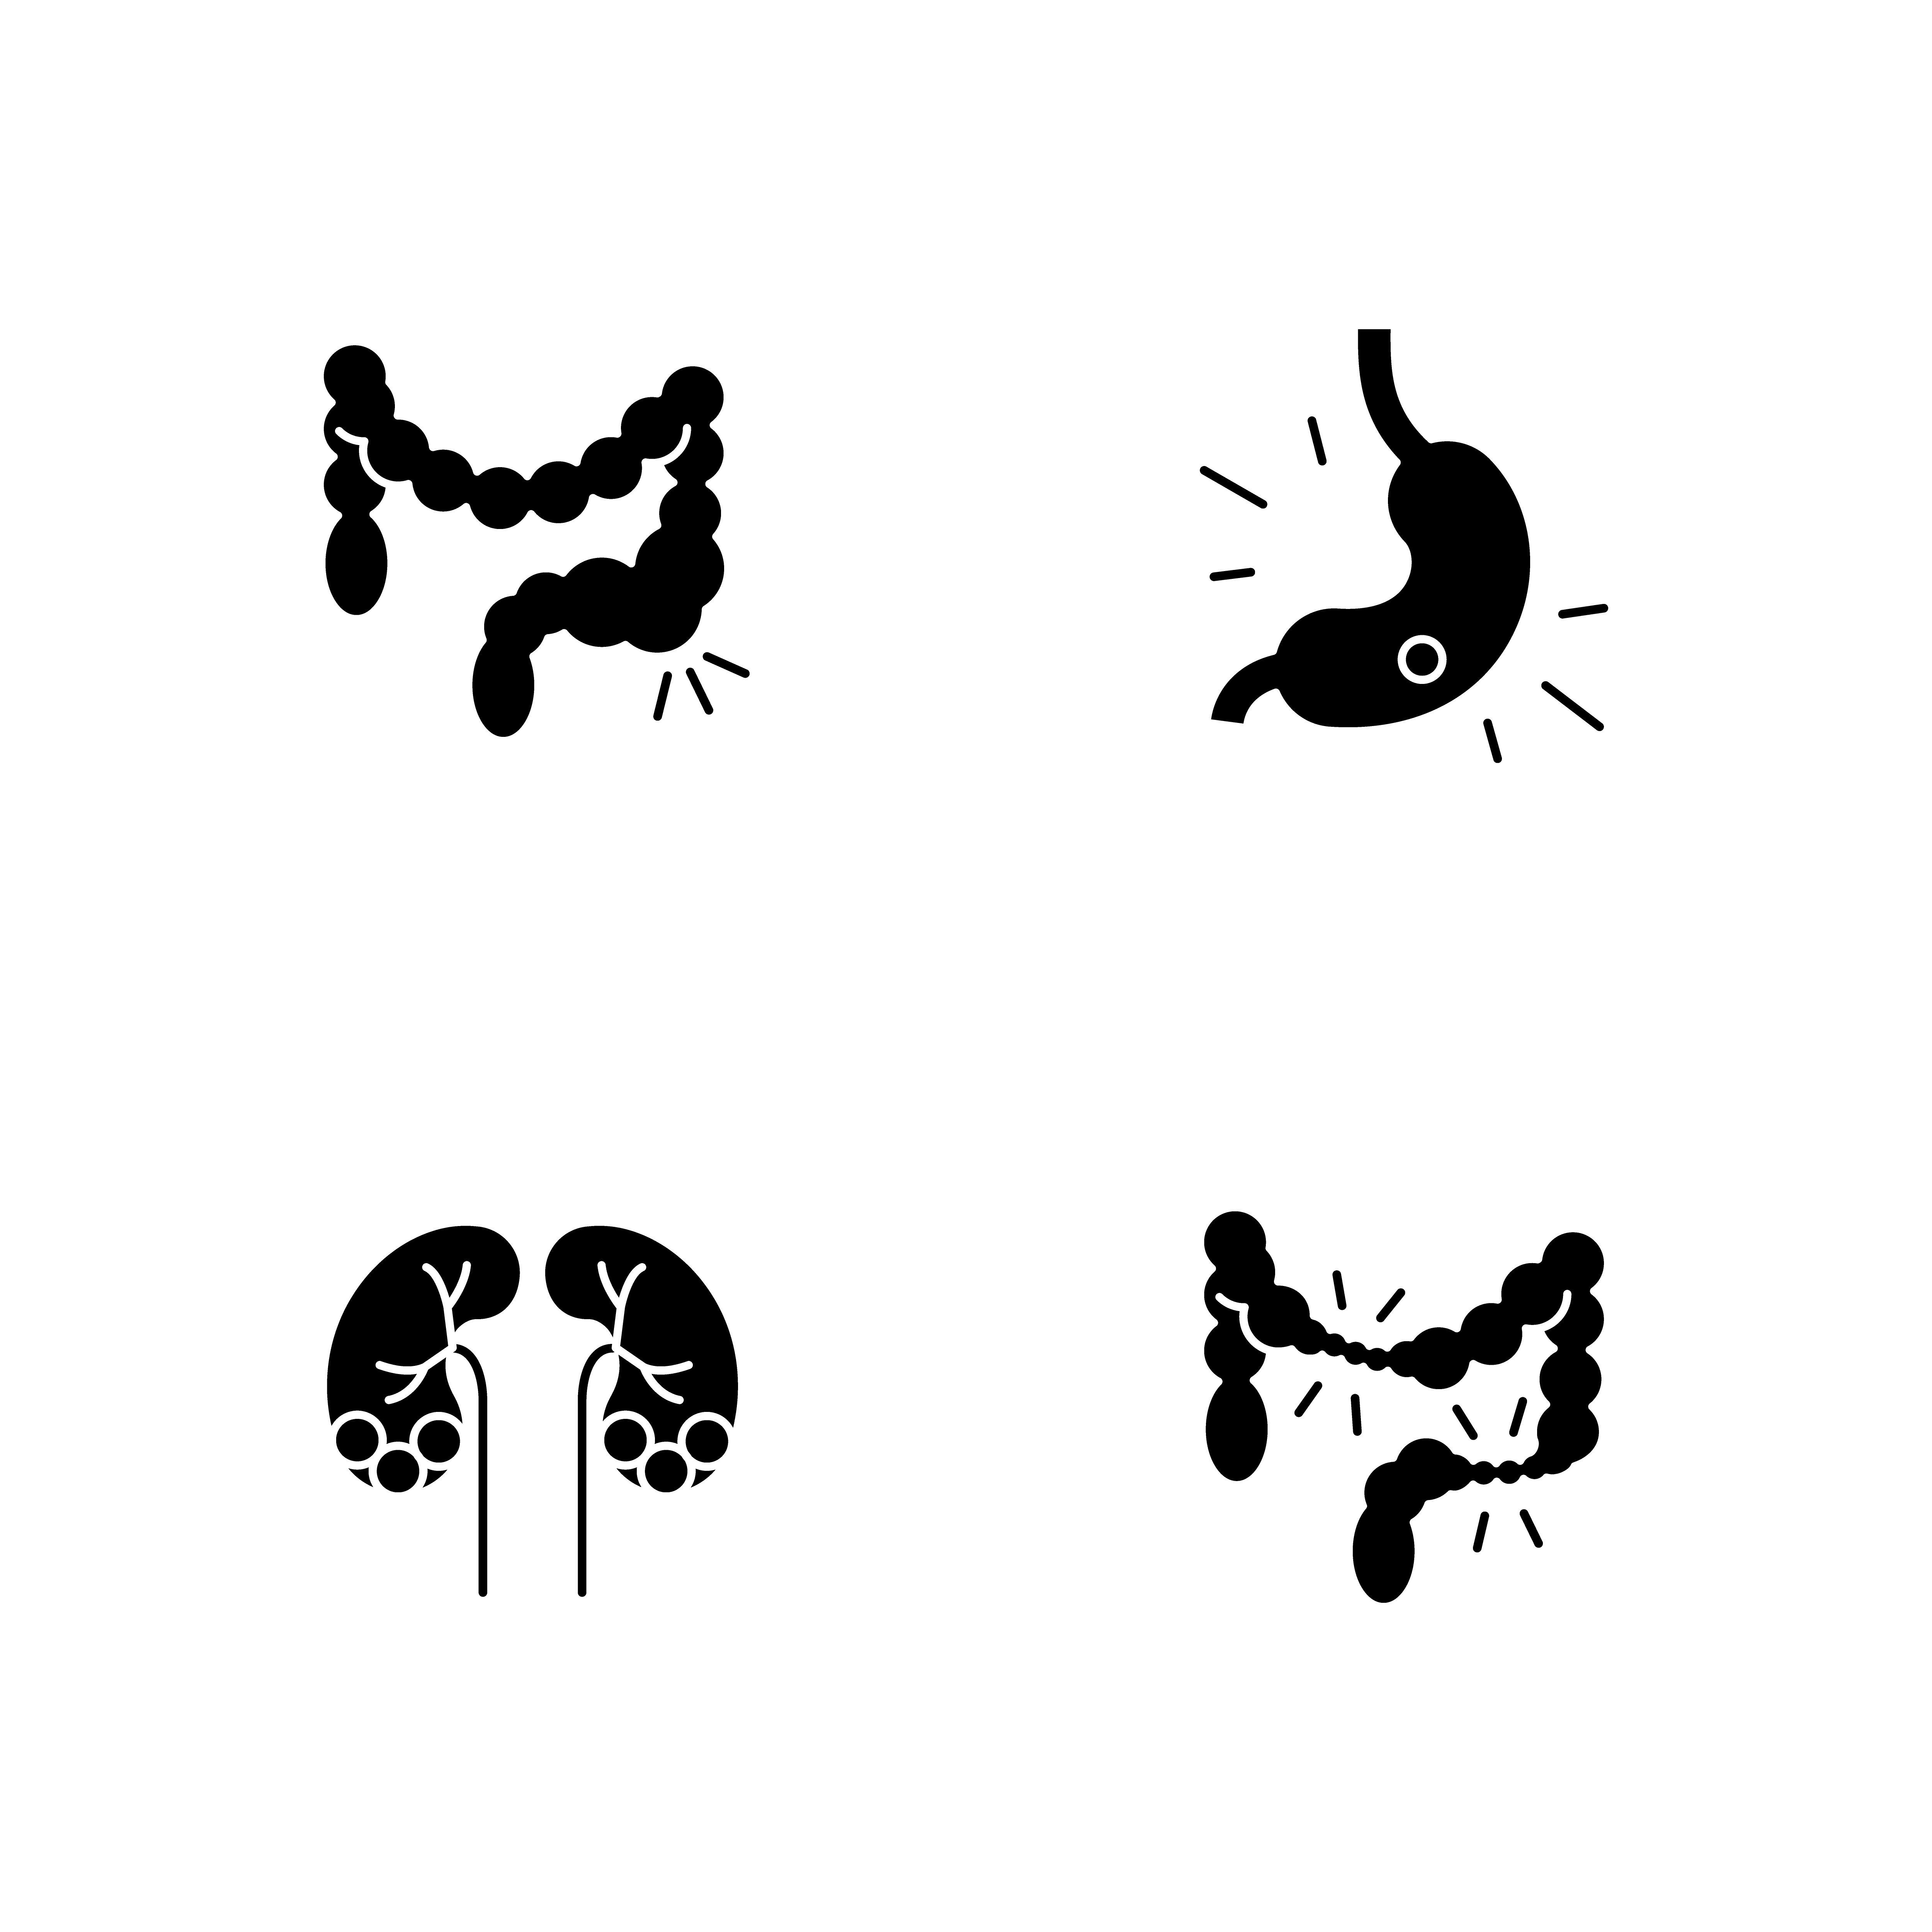 Abdominal Pain Black Glyph Icons Set On White Space By Bsd Studio 